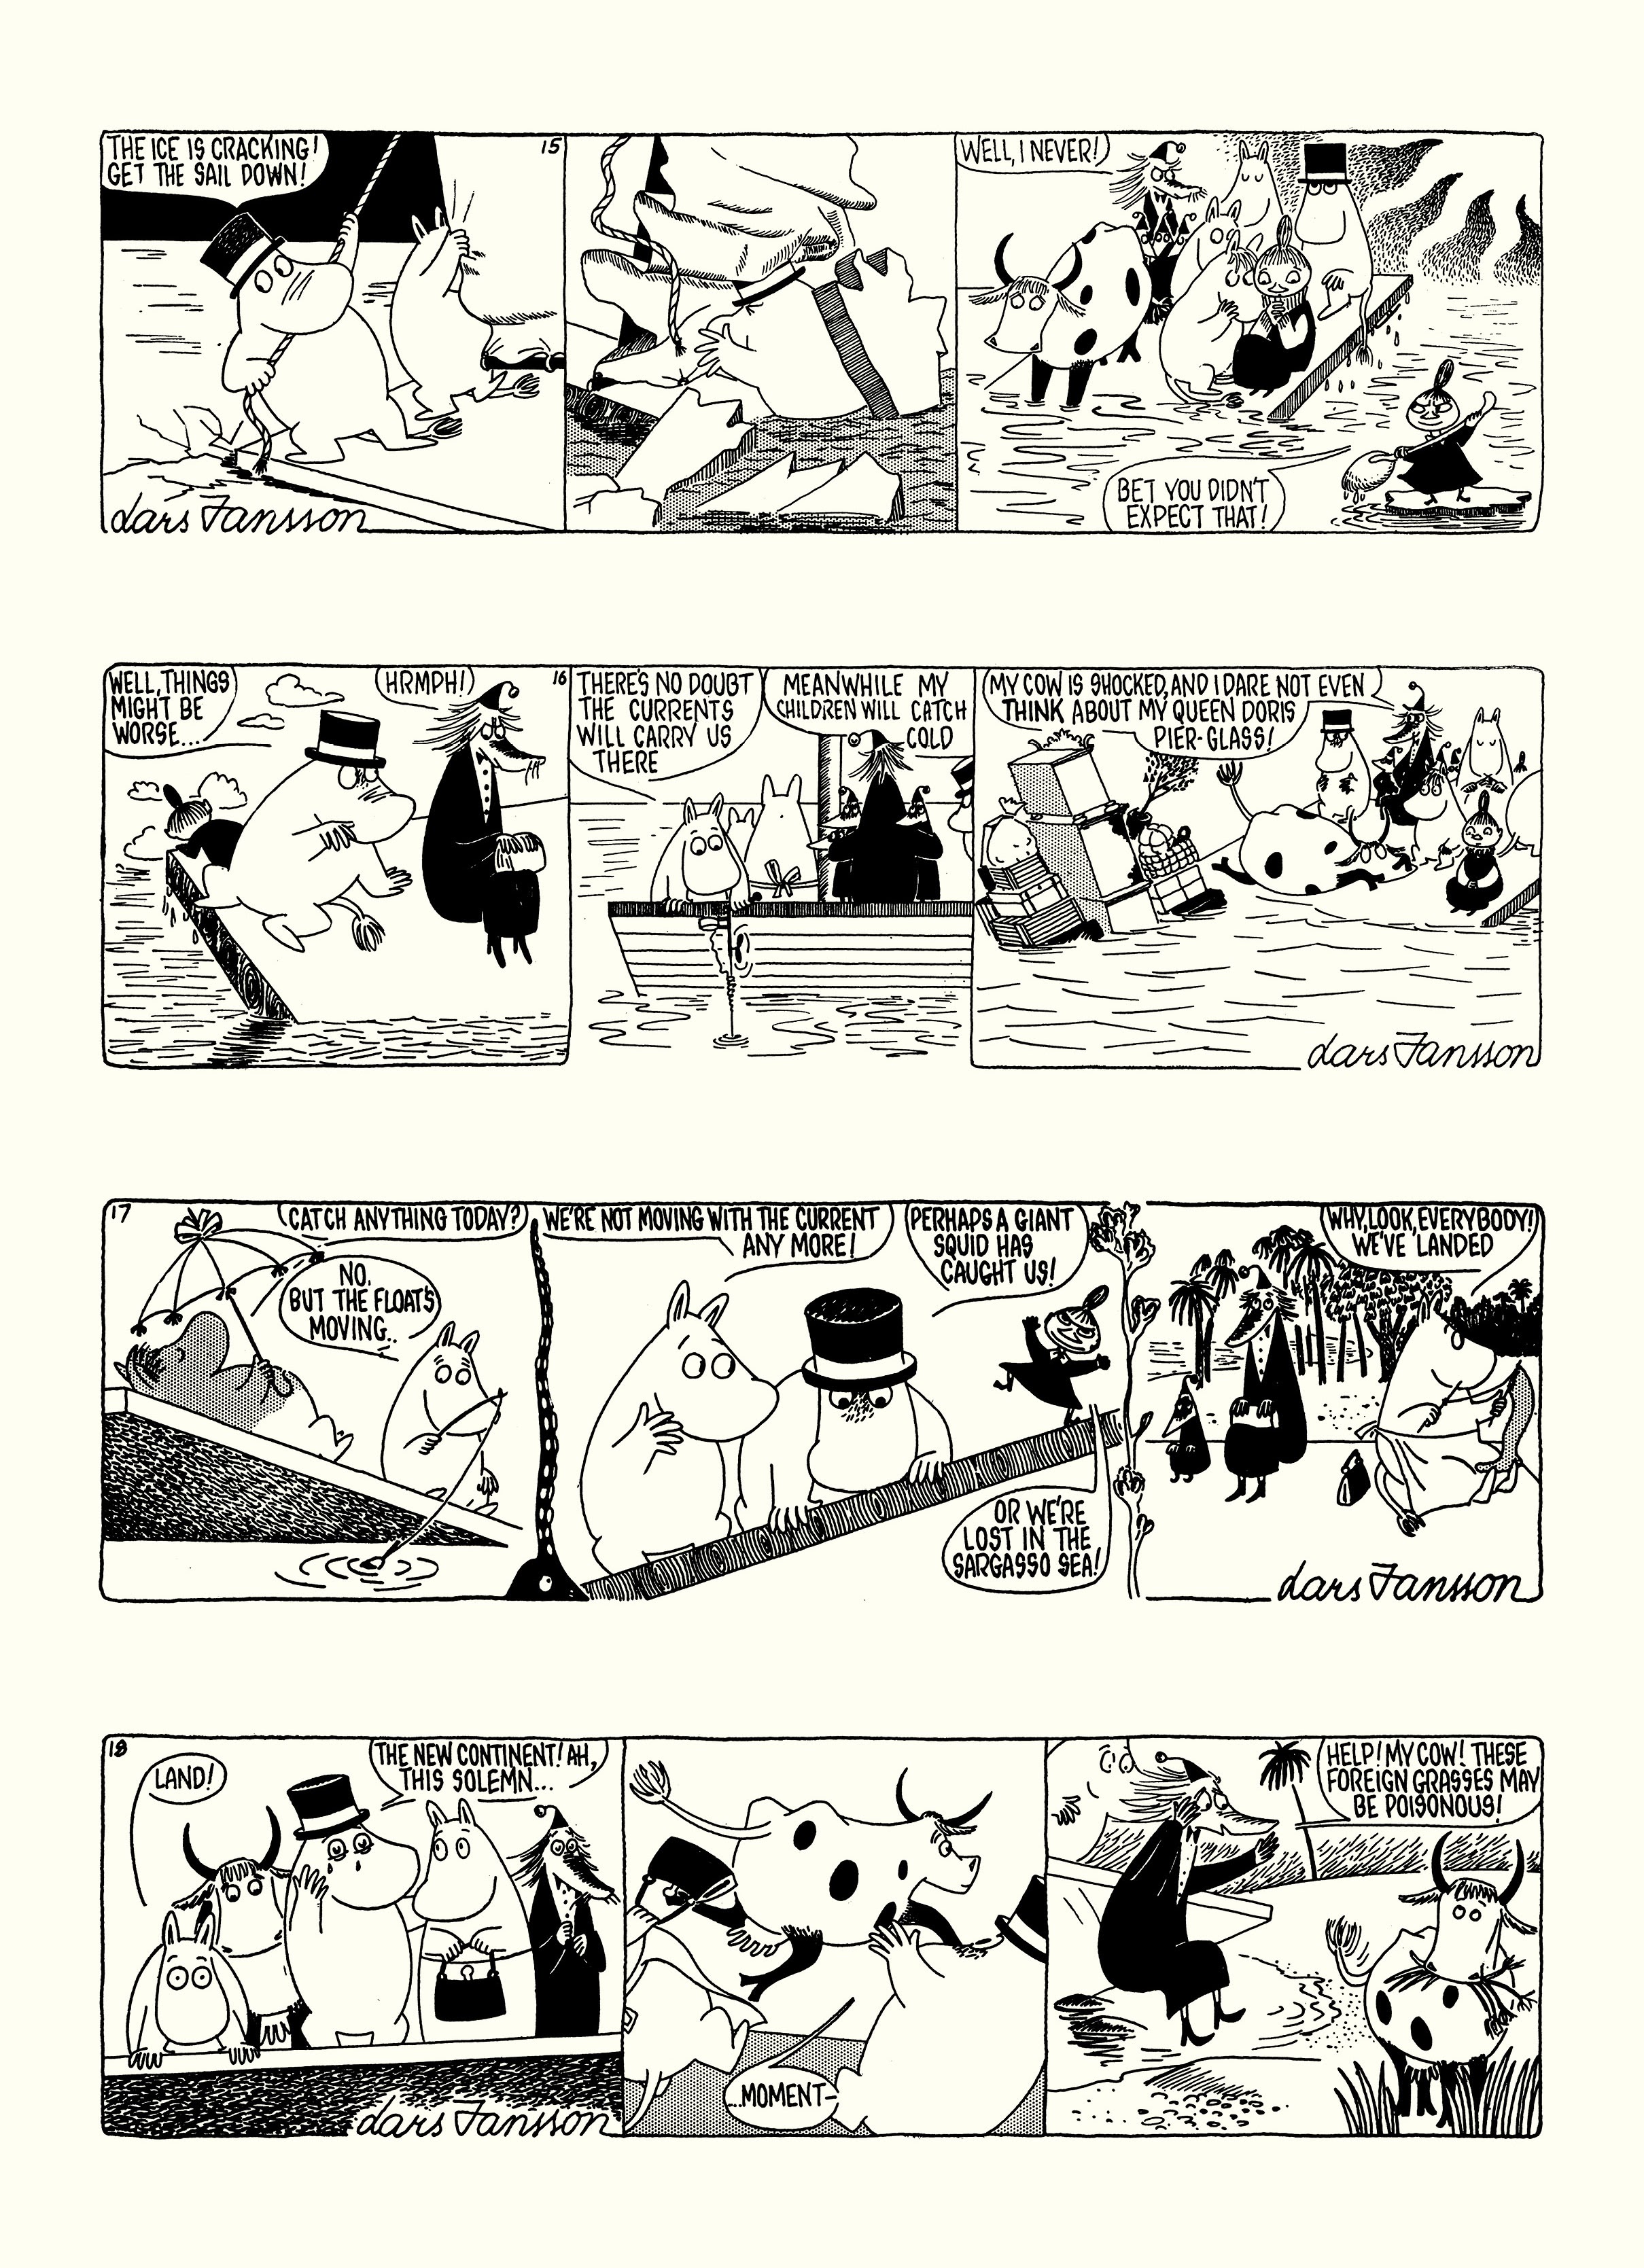 Read online Moomin: The Complete Lars Jansson Comic Strip comic -  Issue # TPB 7 - 10